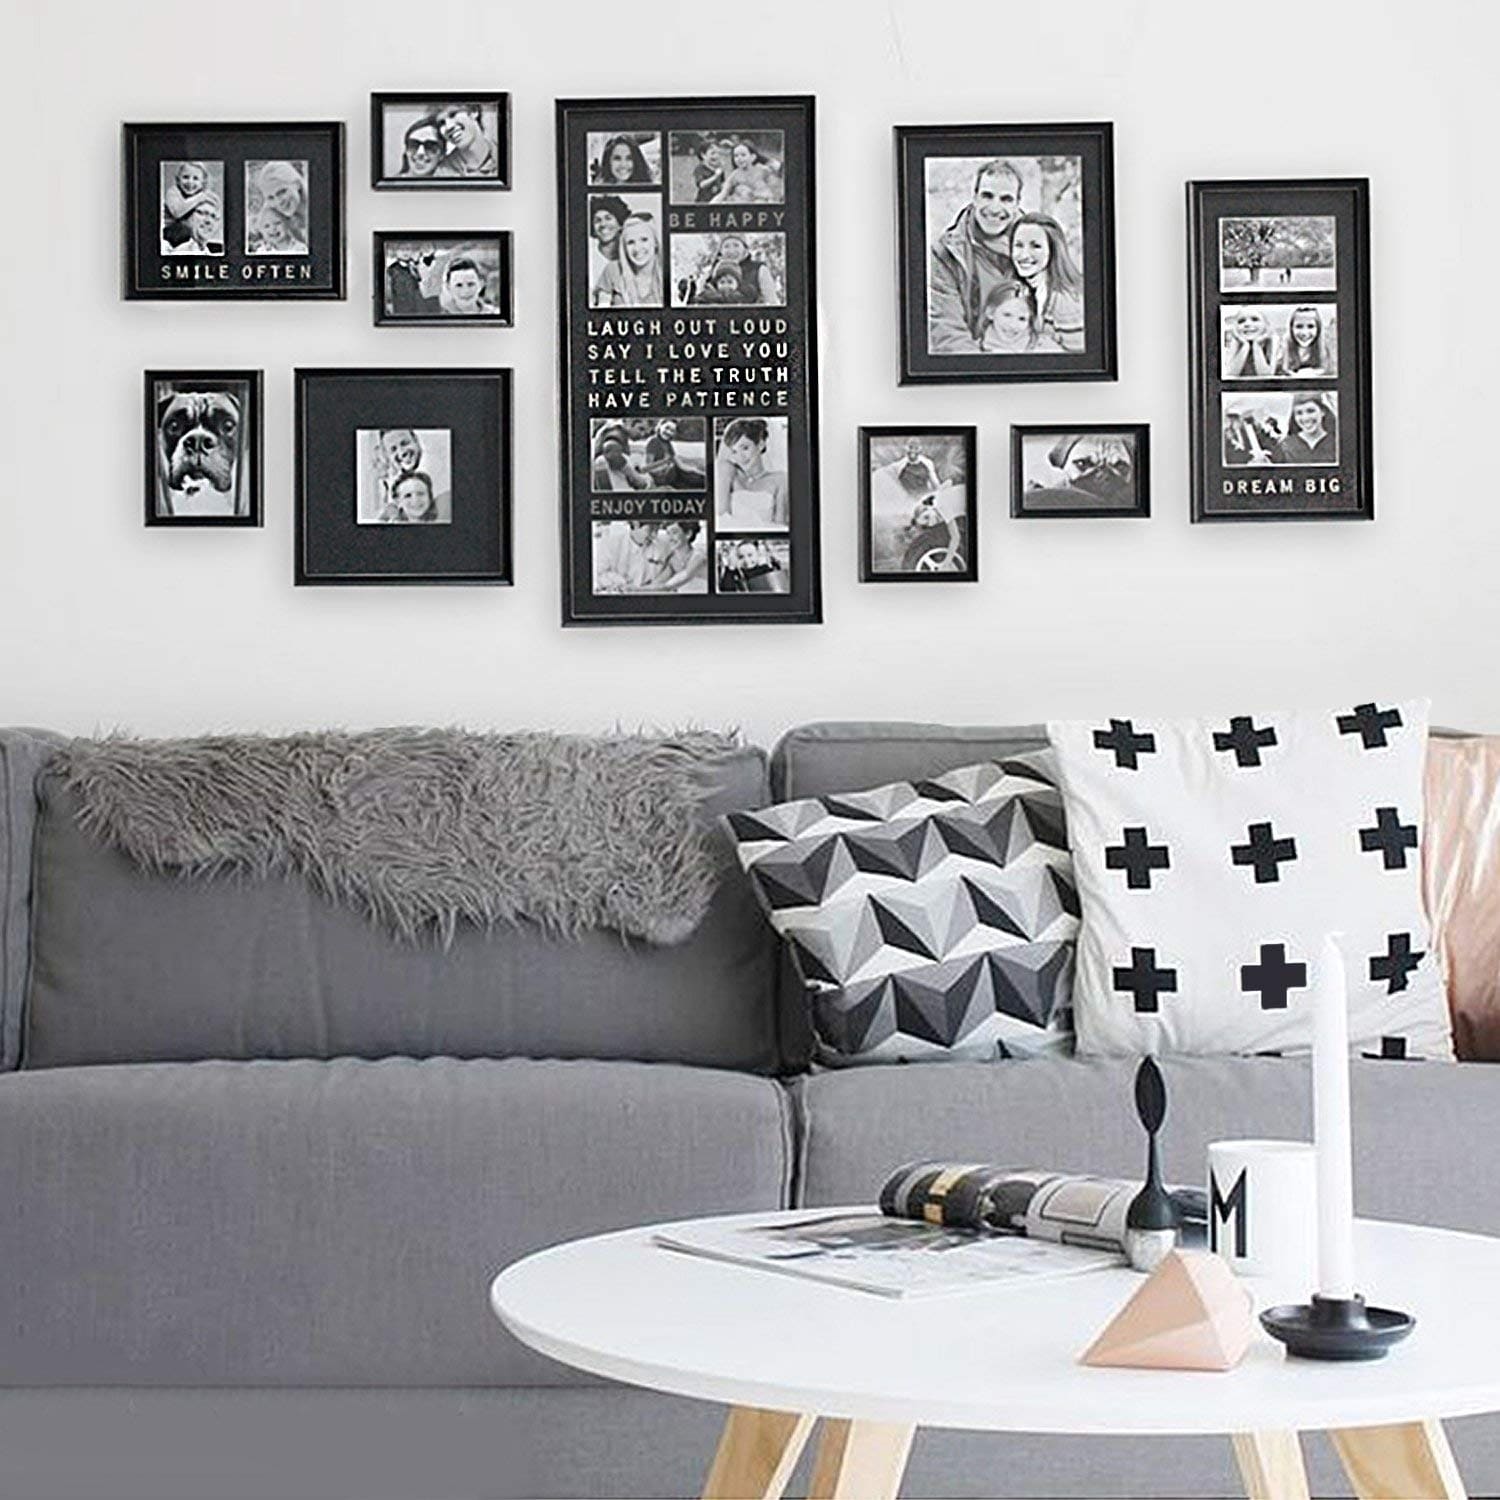 Details about   Bedroom Frame Decor Black Home Large Living Room Photo Collage Stickers 